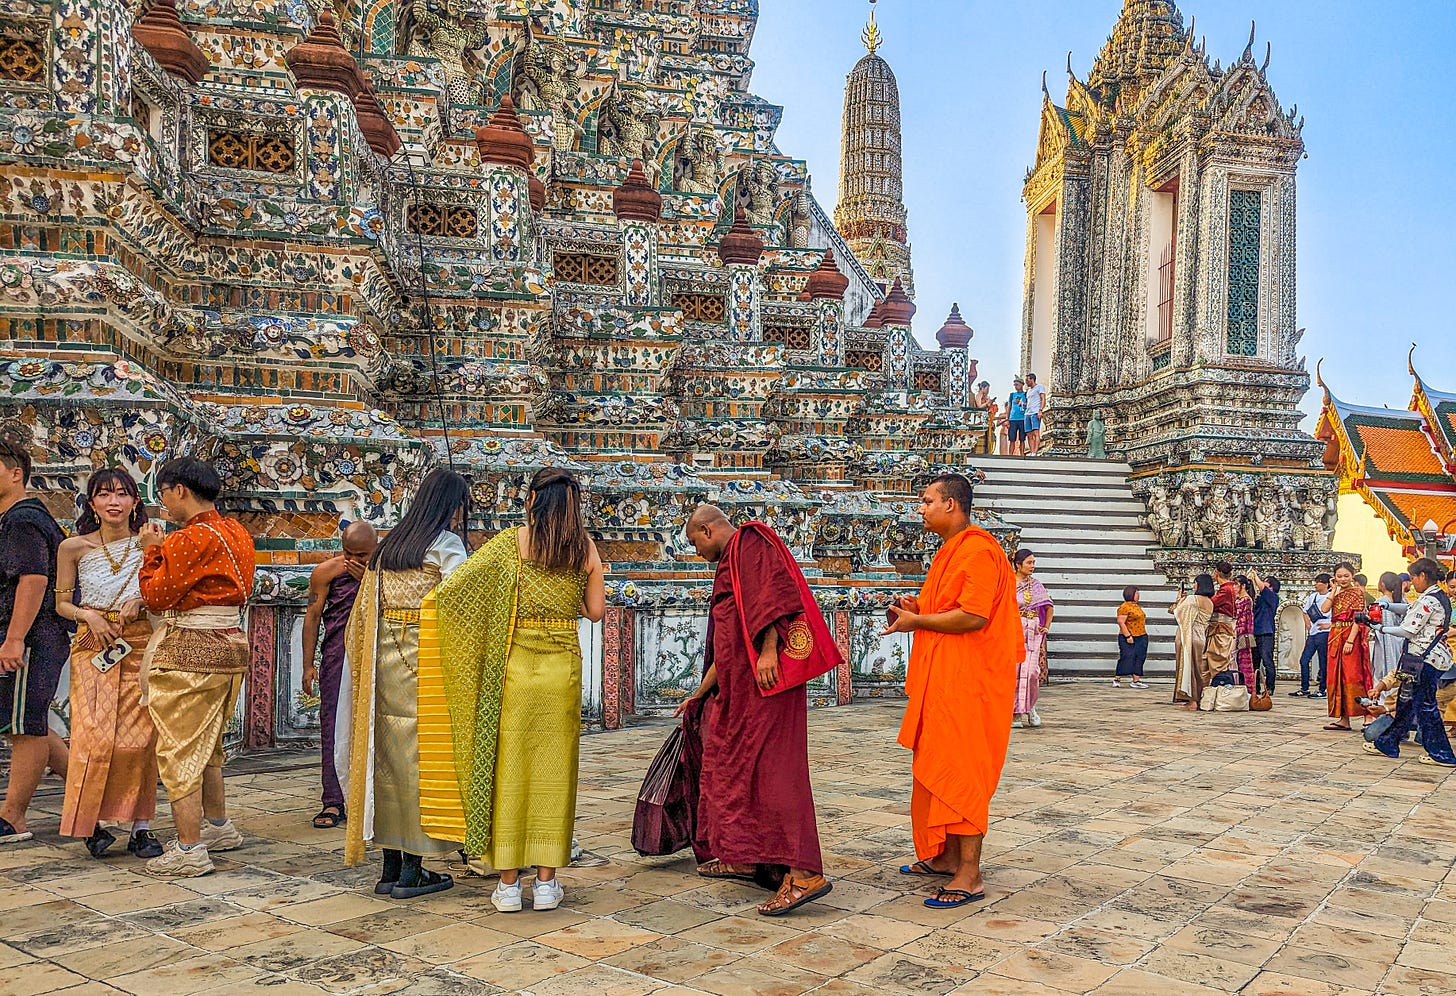 A group of young people dressed in colorful traditional Thai clothing, as well as two monks. 